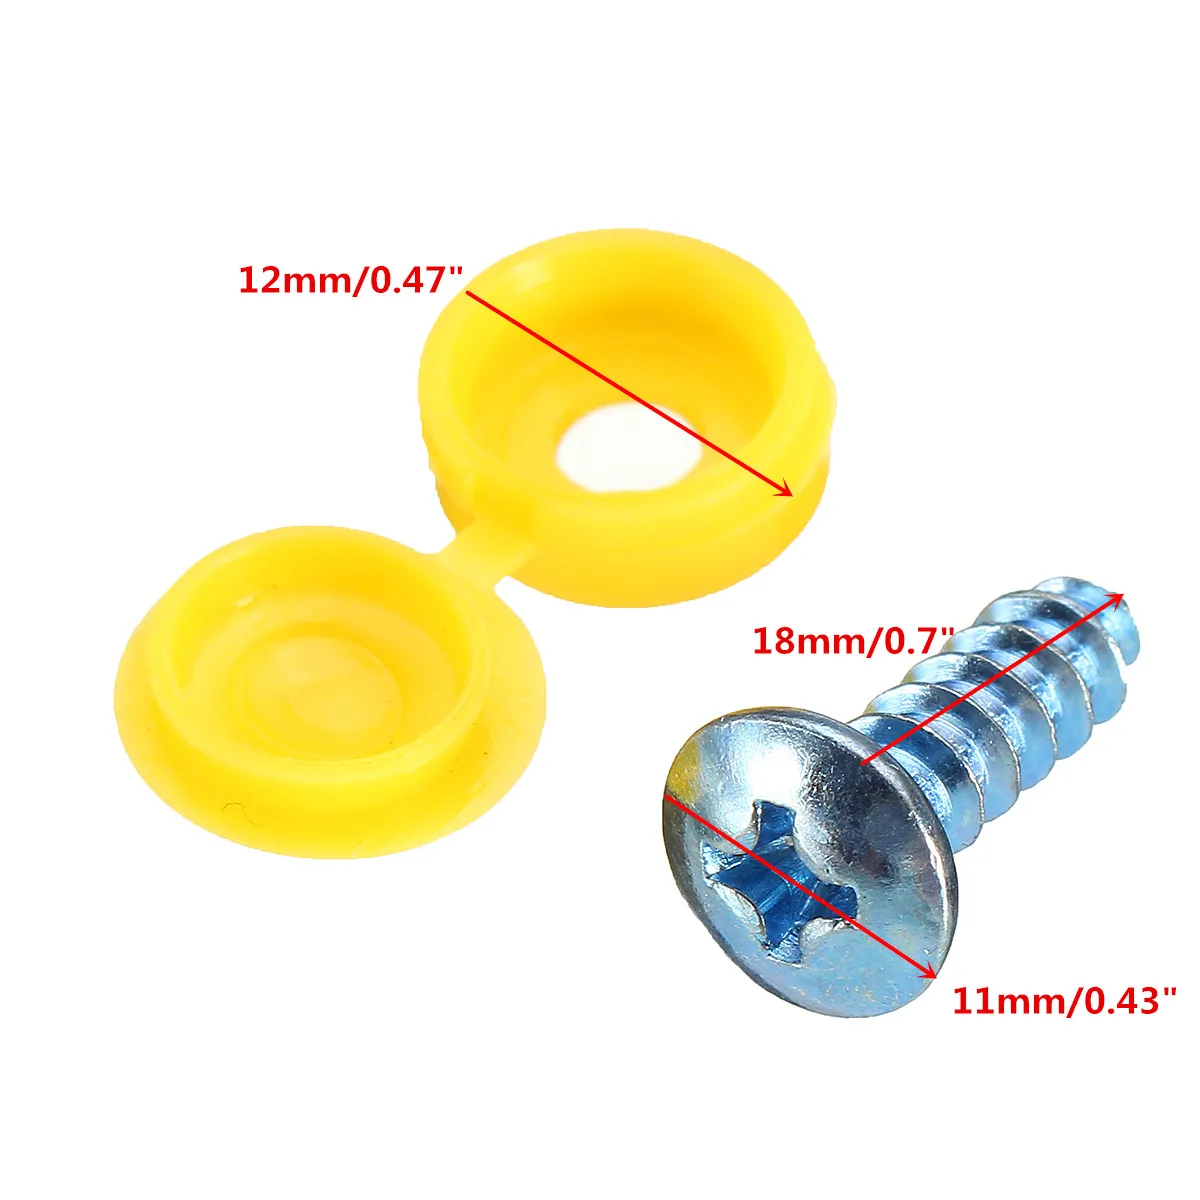 Replacement Number Plate Fitting Kit 4 Yellow Oversized Screws With Caps Covers